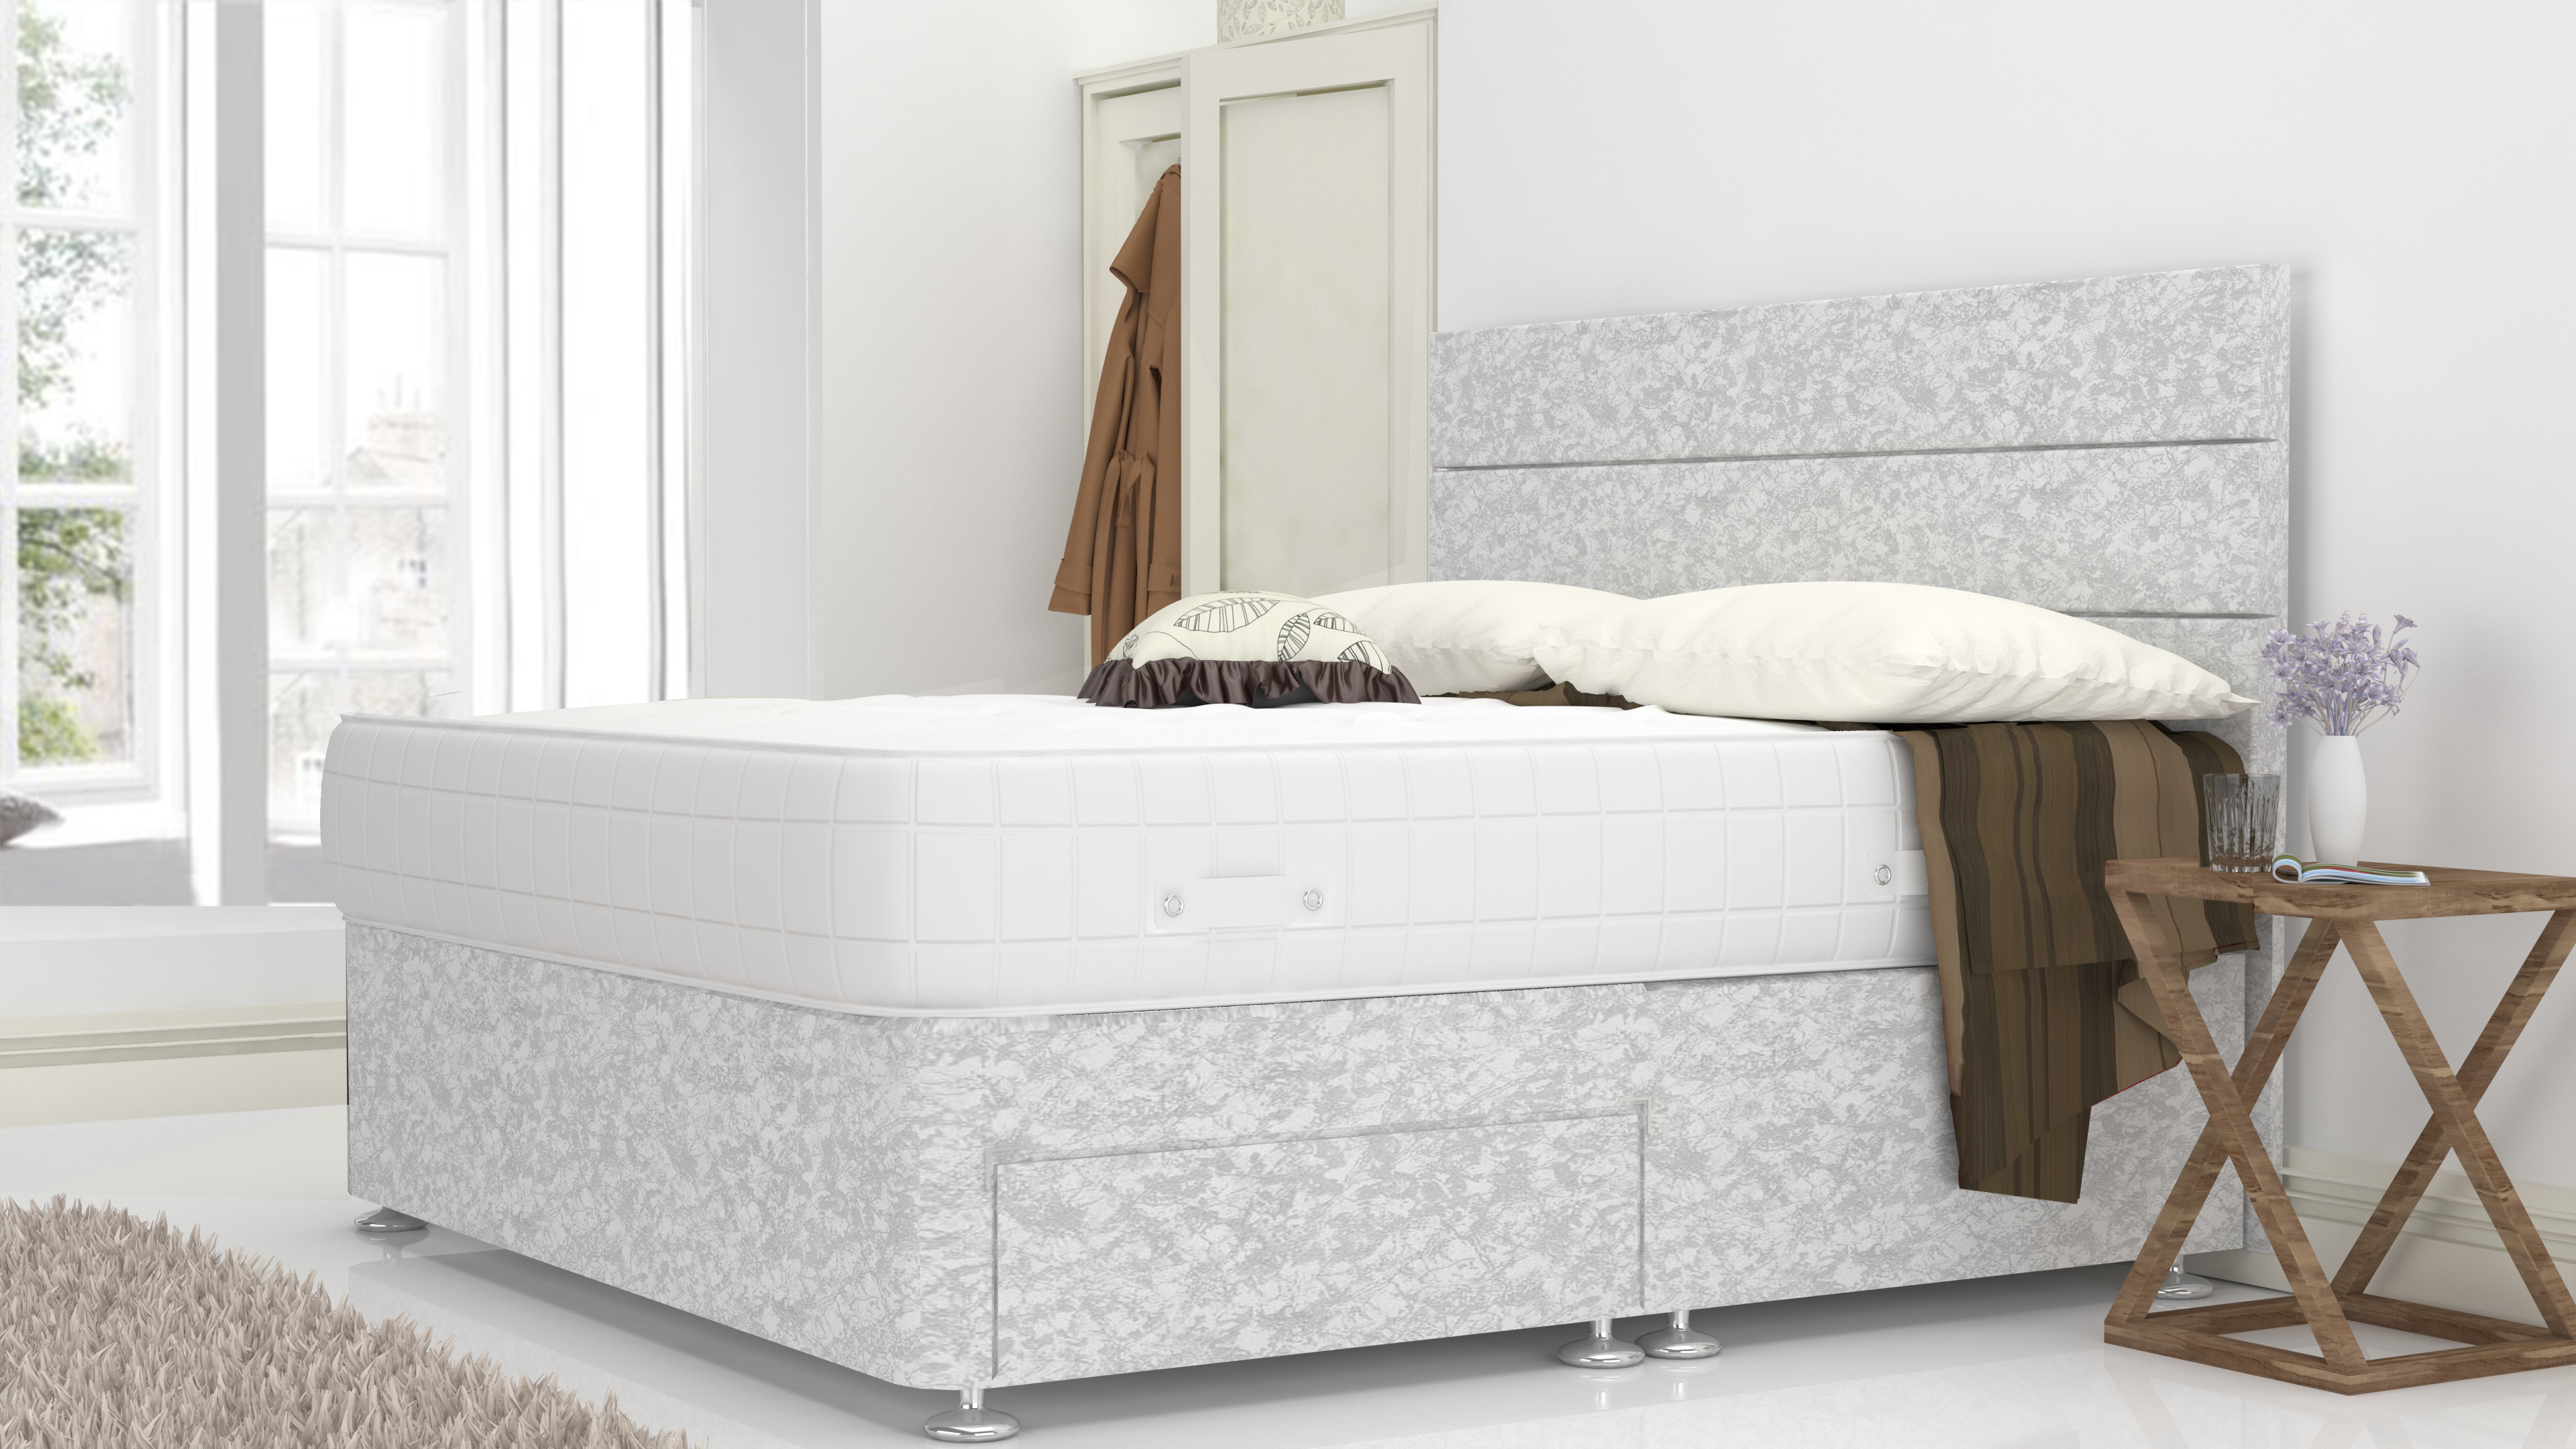 White Crushed Velvet 5 Feet Divan Bed With 3 Panel Headboard (Included Feet) And Free Pillow Top Mattress